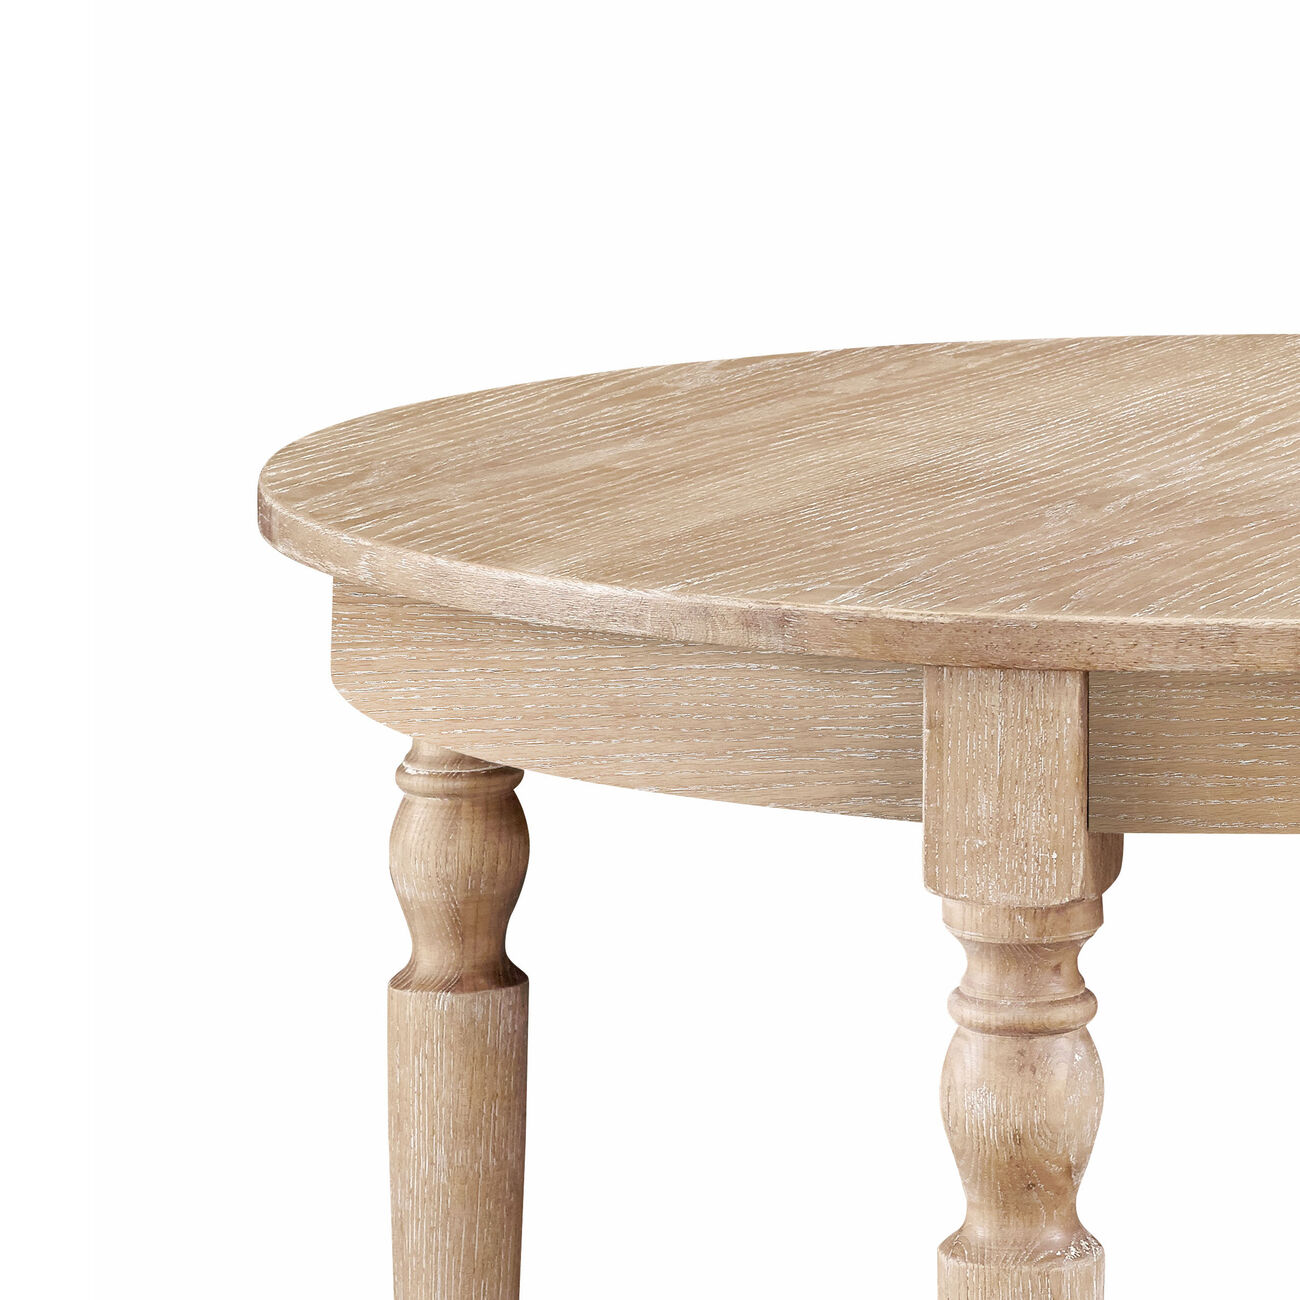 Transitional Style Wooden Round Table with Turned Legs, Light Brown